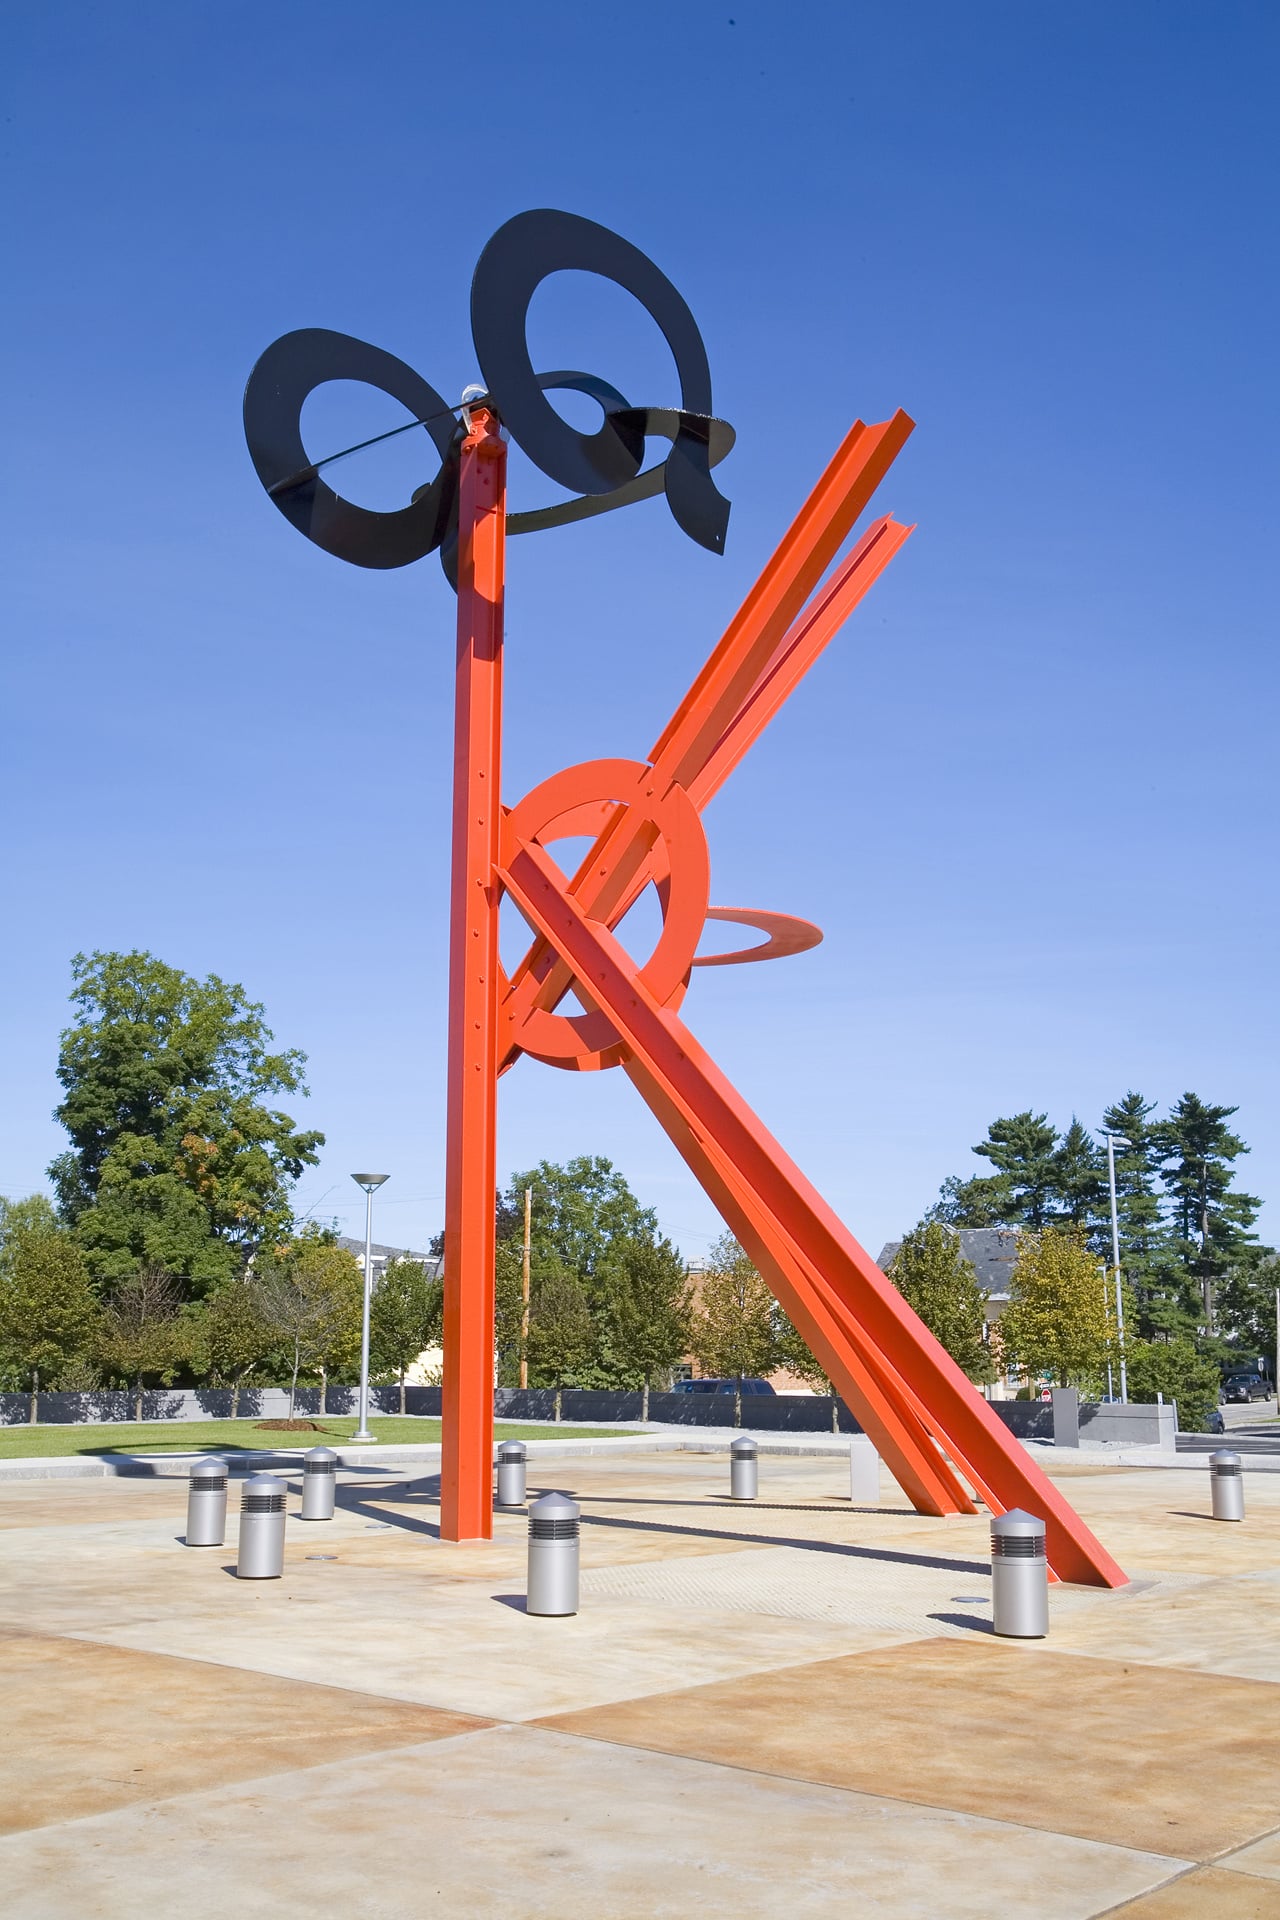 a monumental red sculpture in the shape of a K with a red circle at the center and 3 black disks at the top